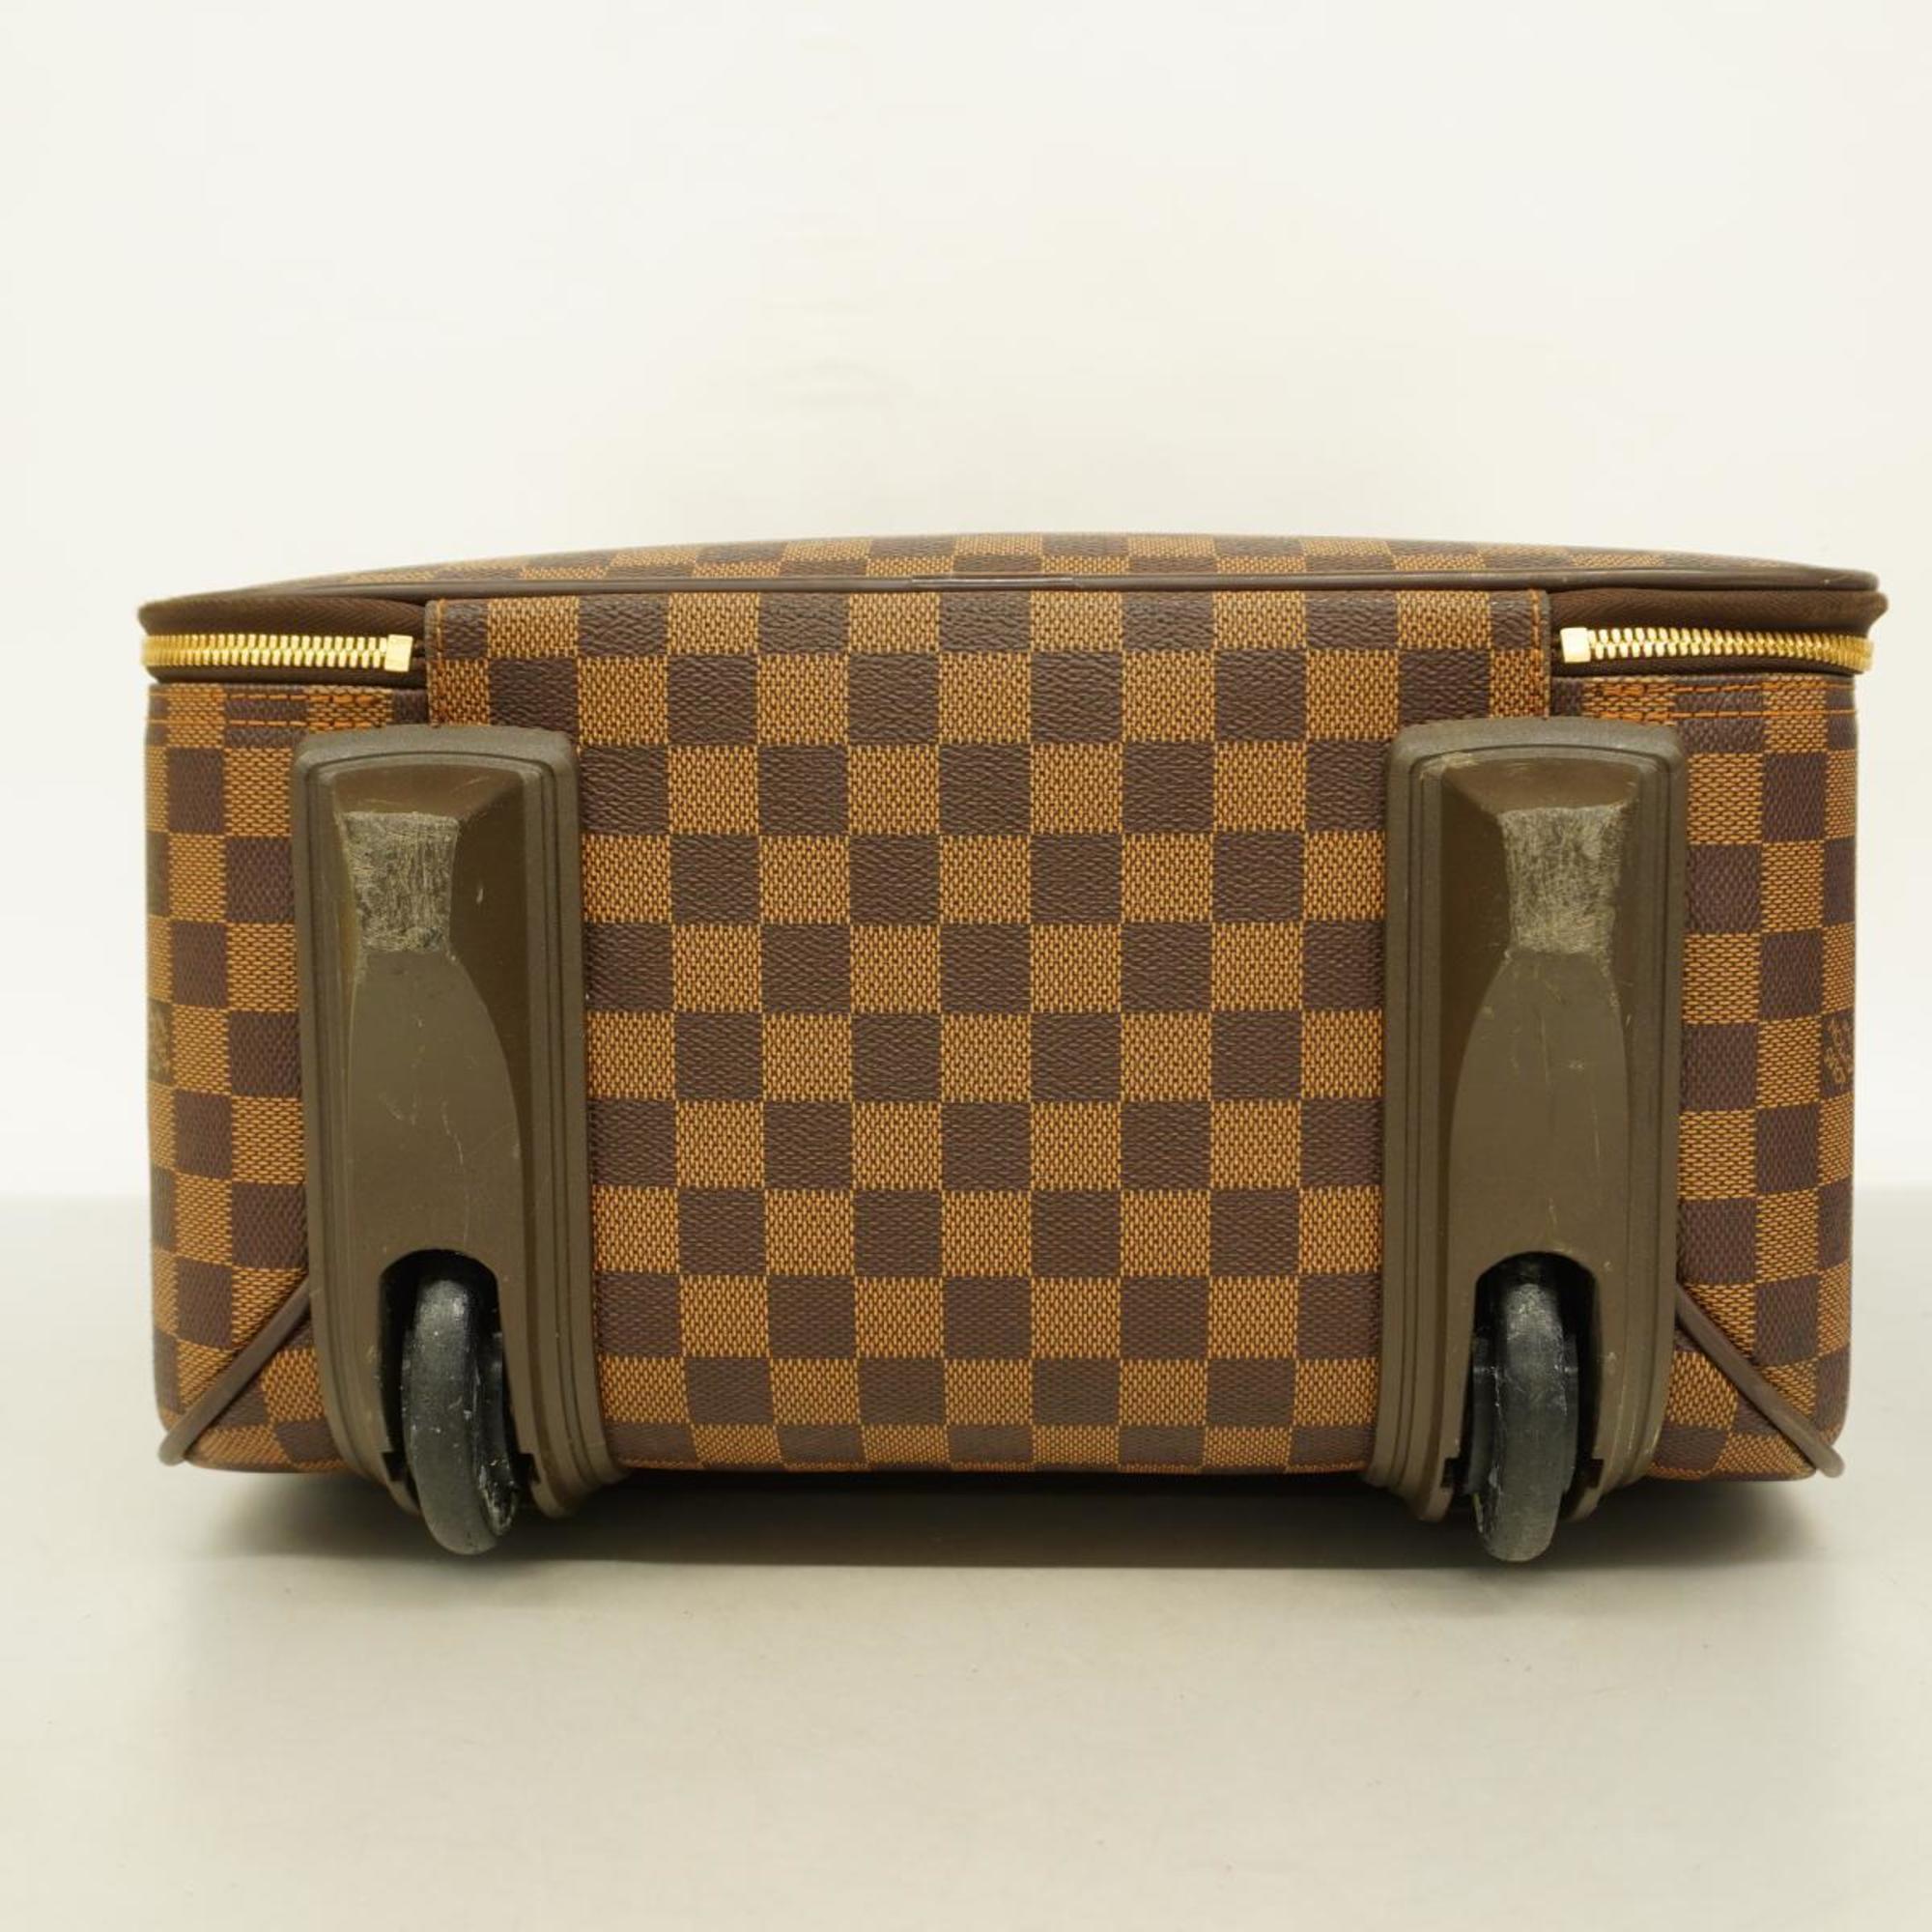 z15152】LOUIS VUITTON ルイヴィトン ペガス45 ダミエ キャリーバッグ 